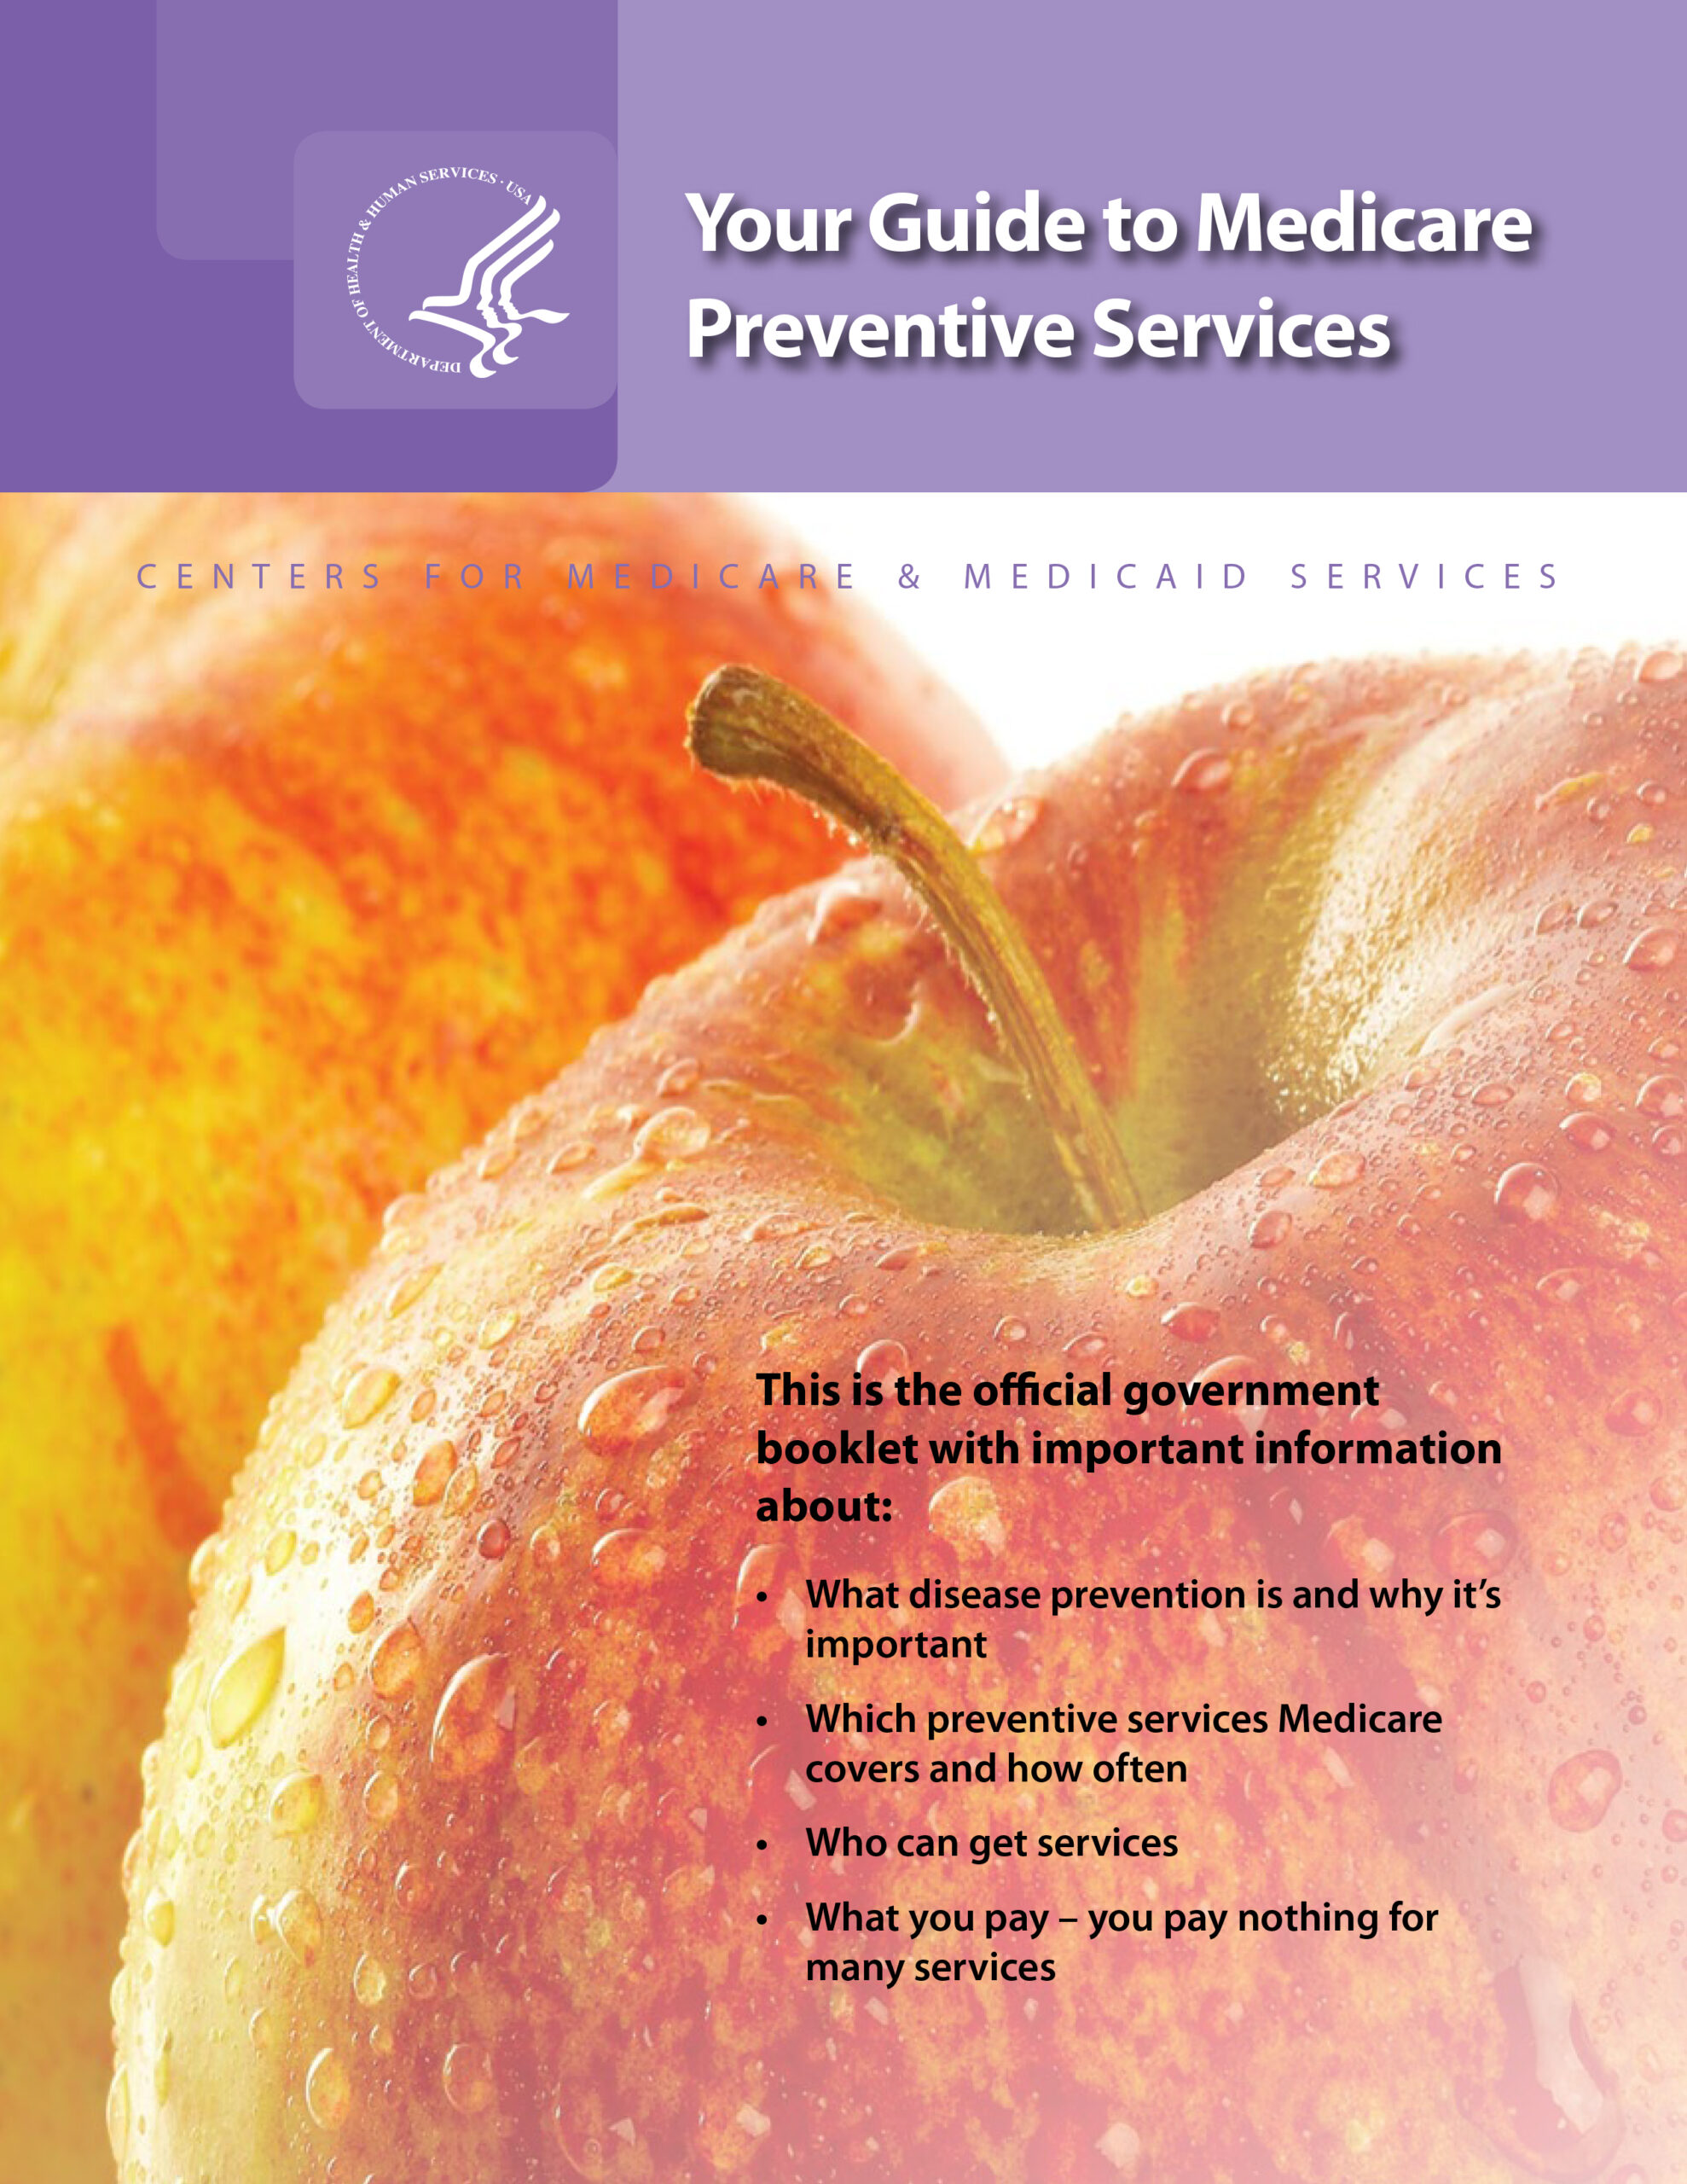 Your guide to Medicare preventive services.